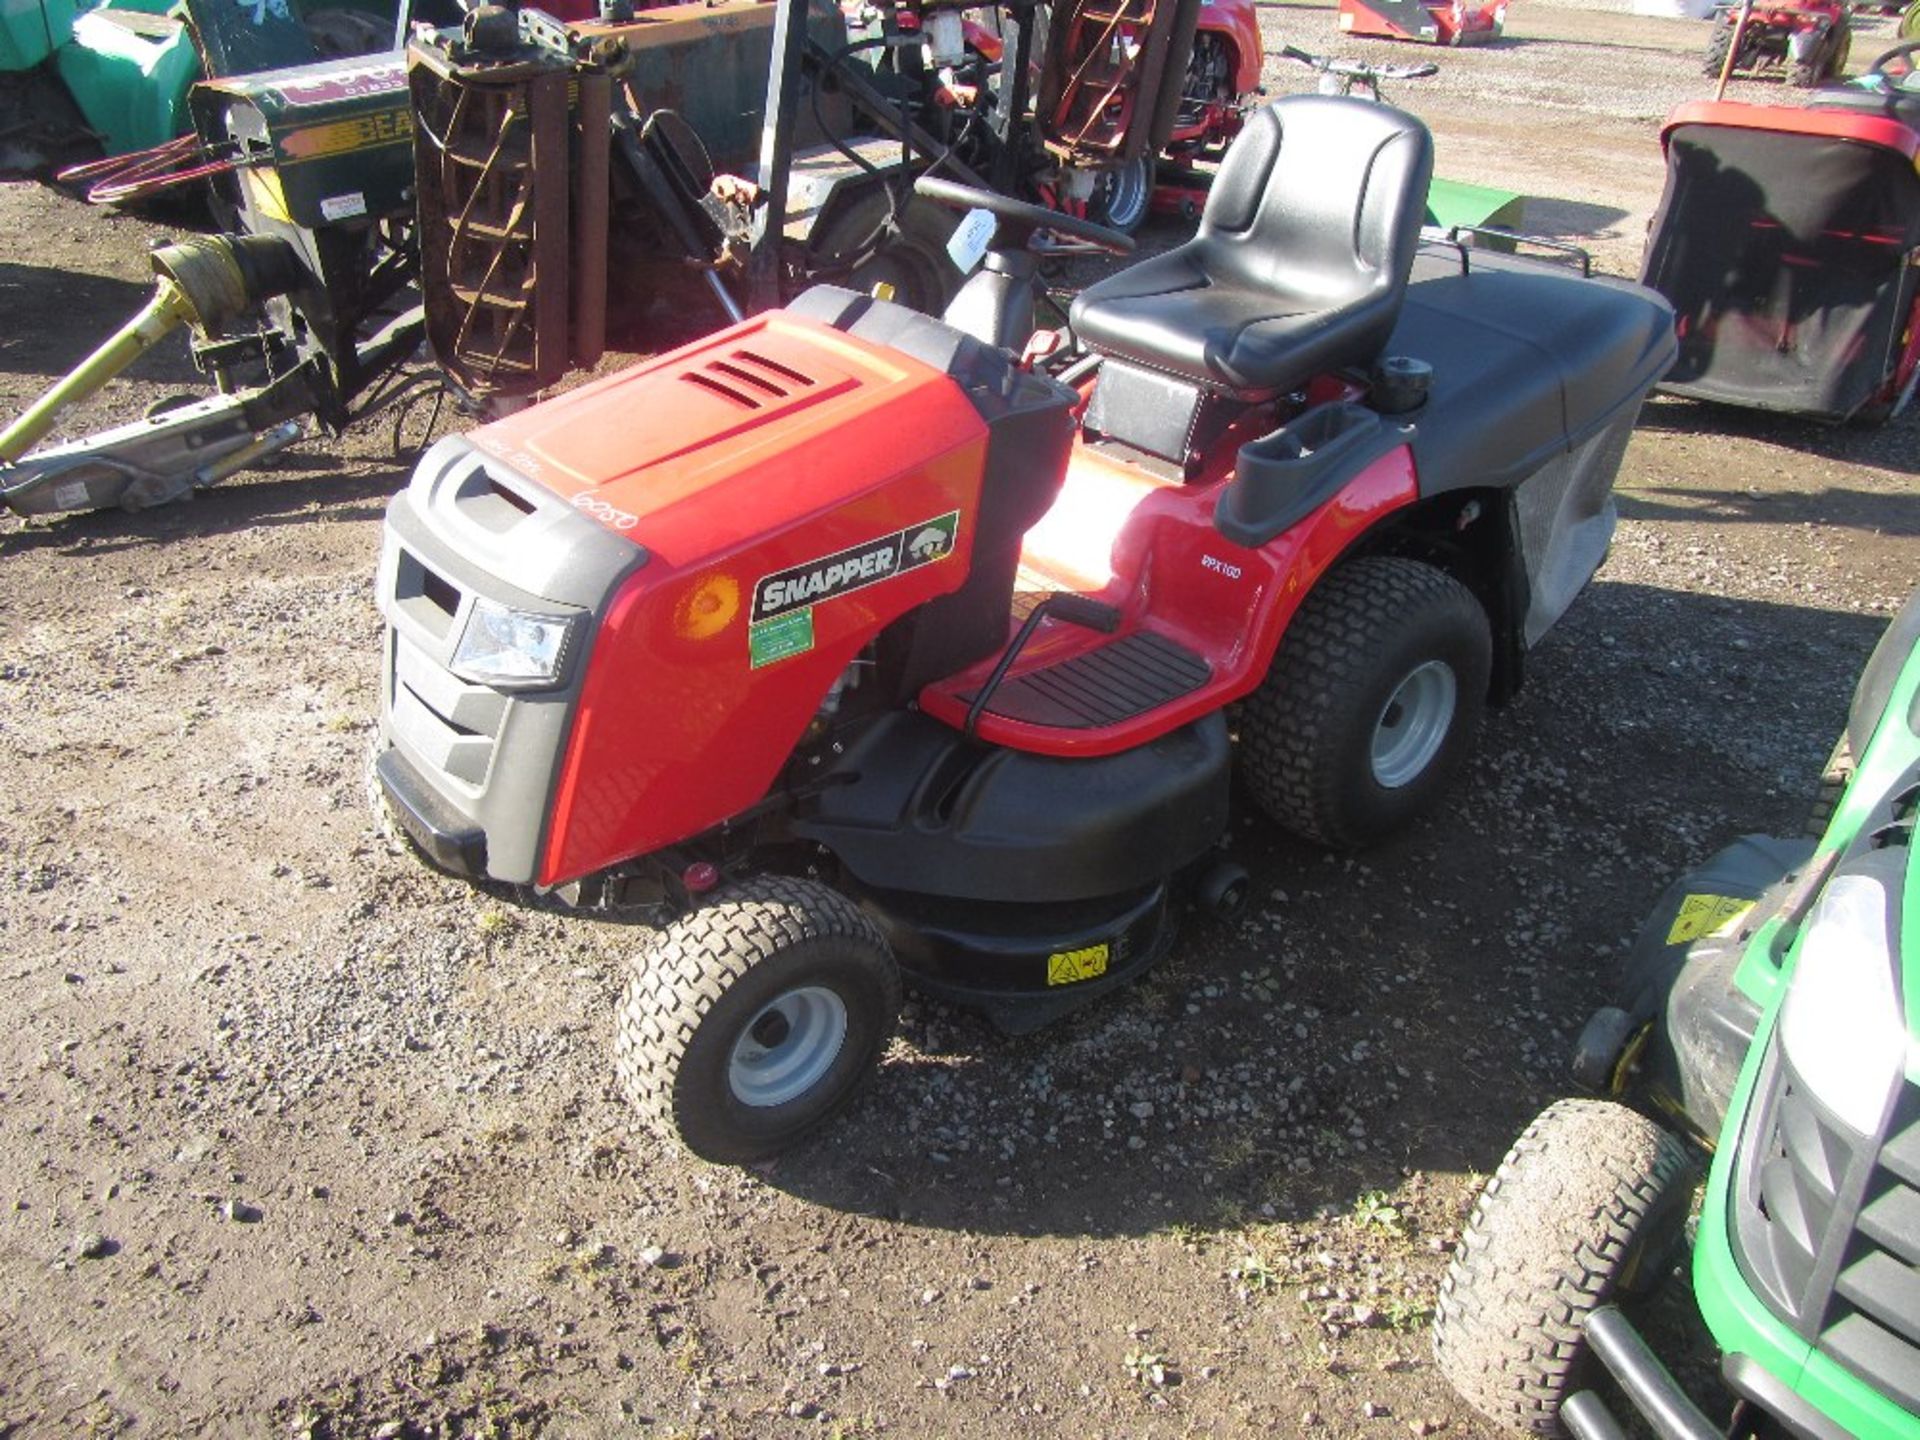 Snapper Rpx100 Ride on Mower c/w rear collector 38in deck Hours: 21